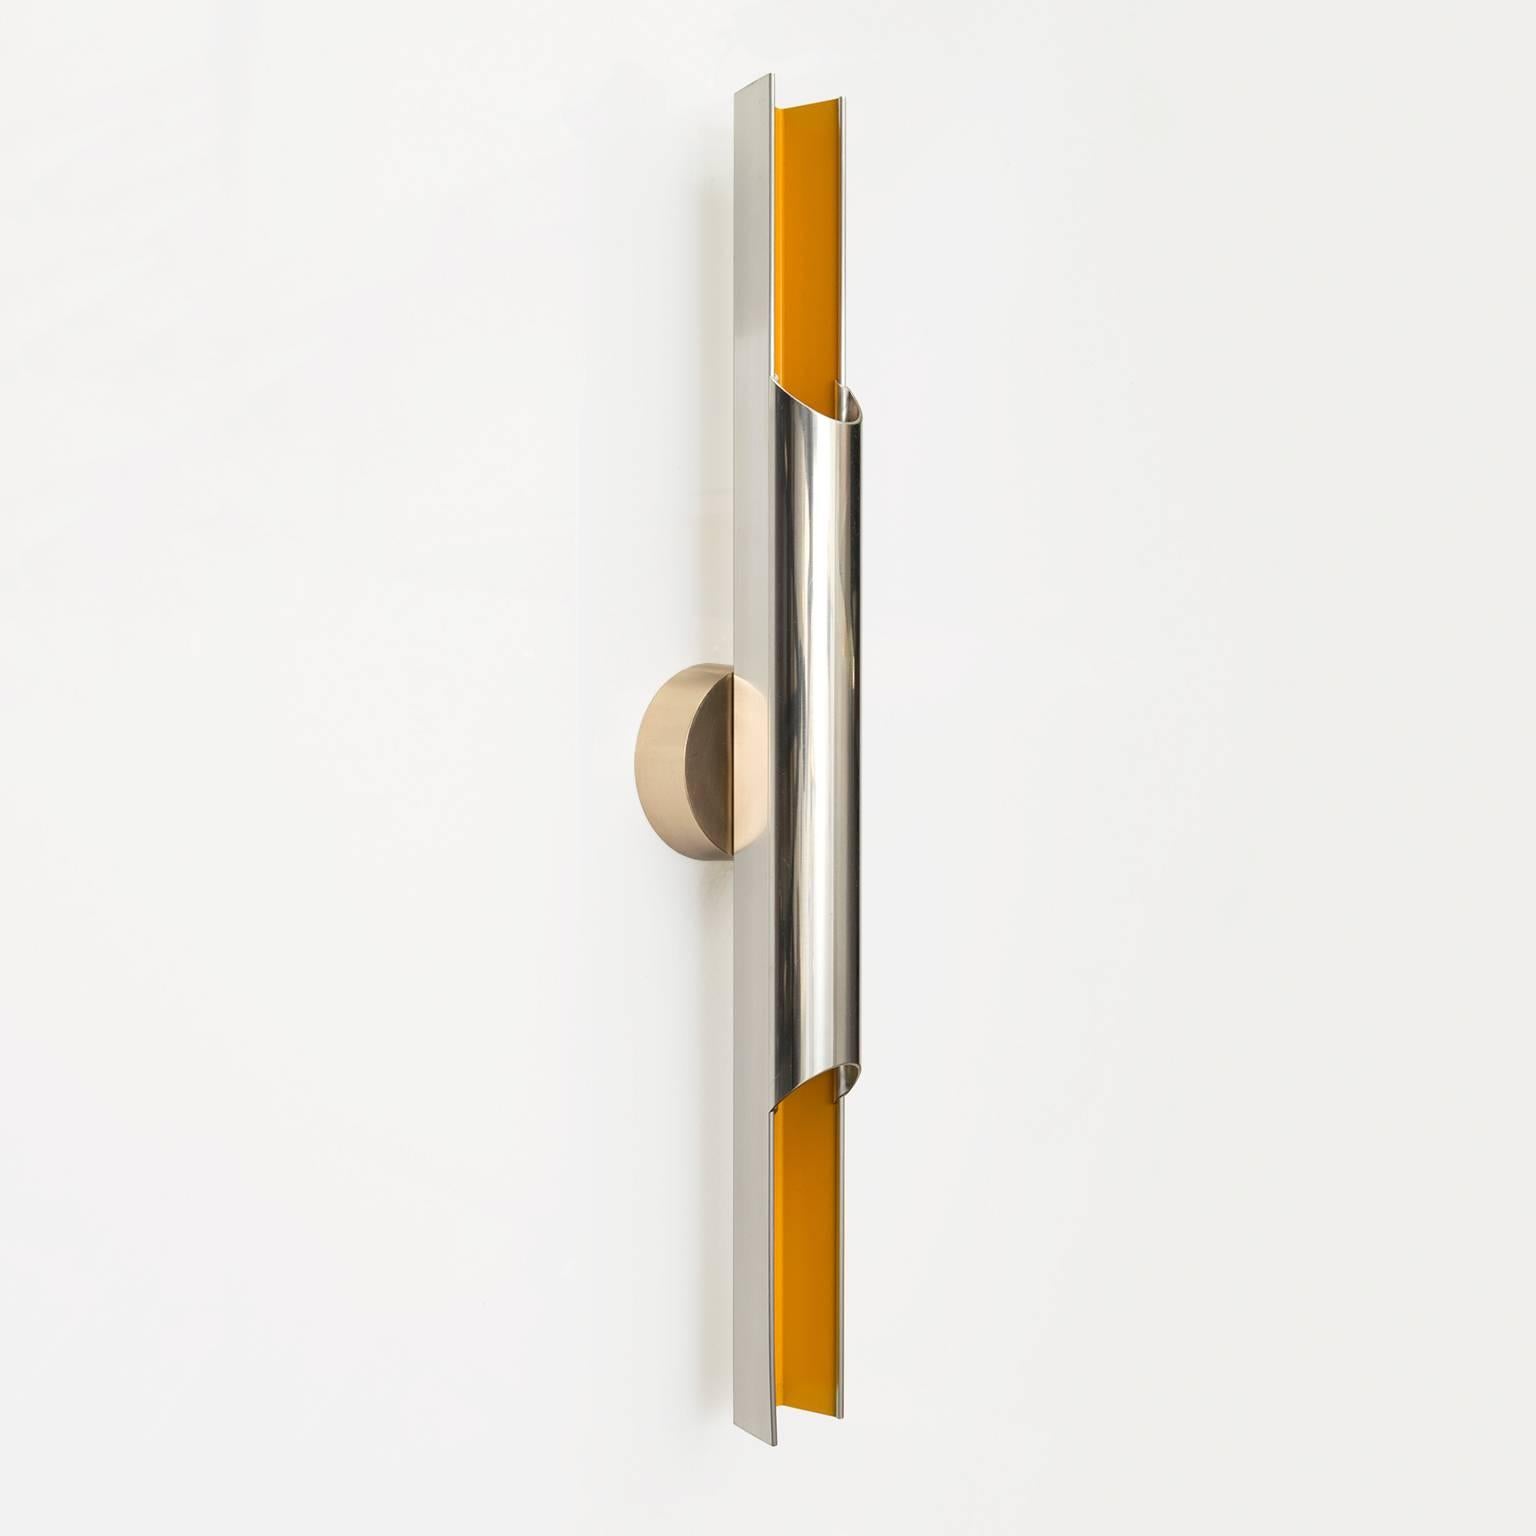 A Scandinavian Modern "Pan-Opticon" sconce in polished aluminium with yellow lacquer. Designed by Bent Karlby for Lyfa, Denmark, 1968. The tubular form hold two candelabra base sockets. The backplate is polished brass. Newly rewired for